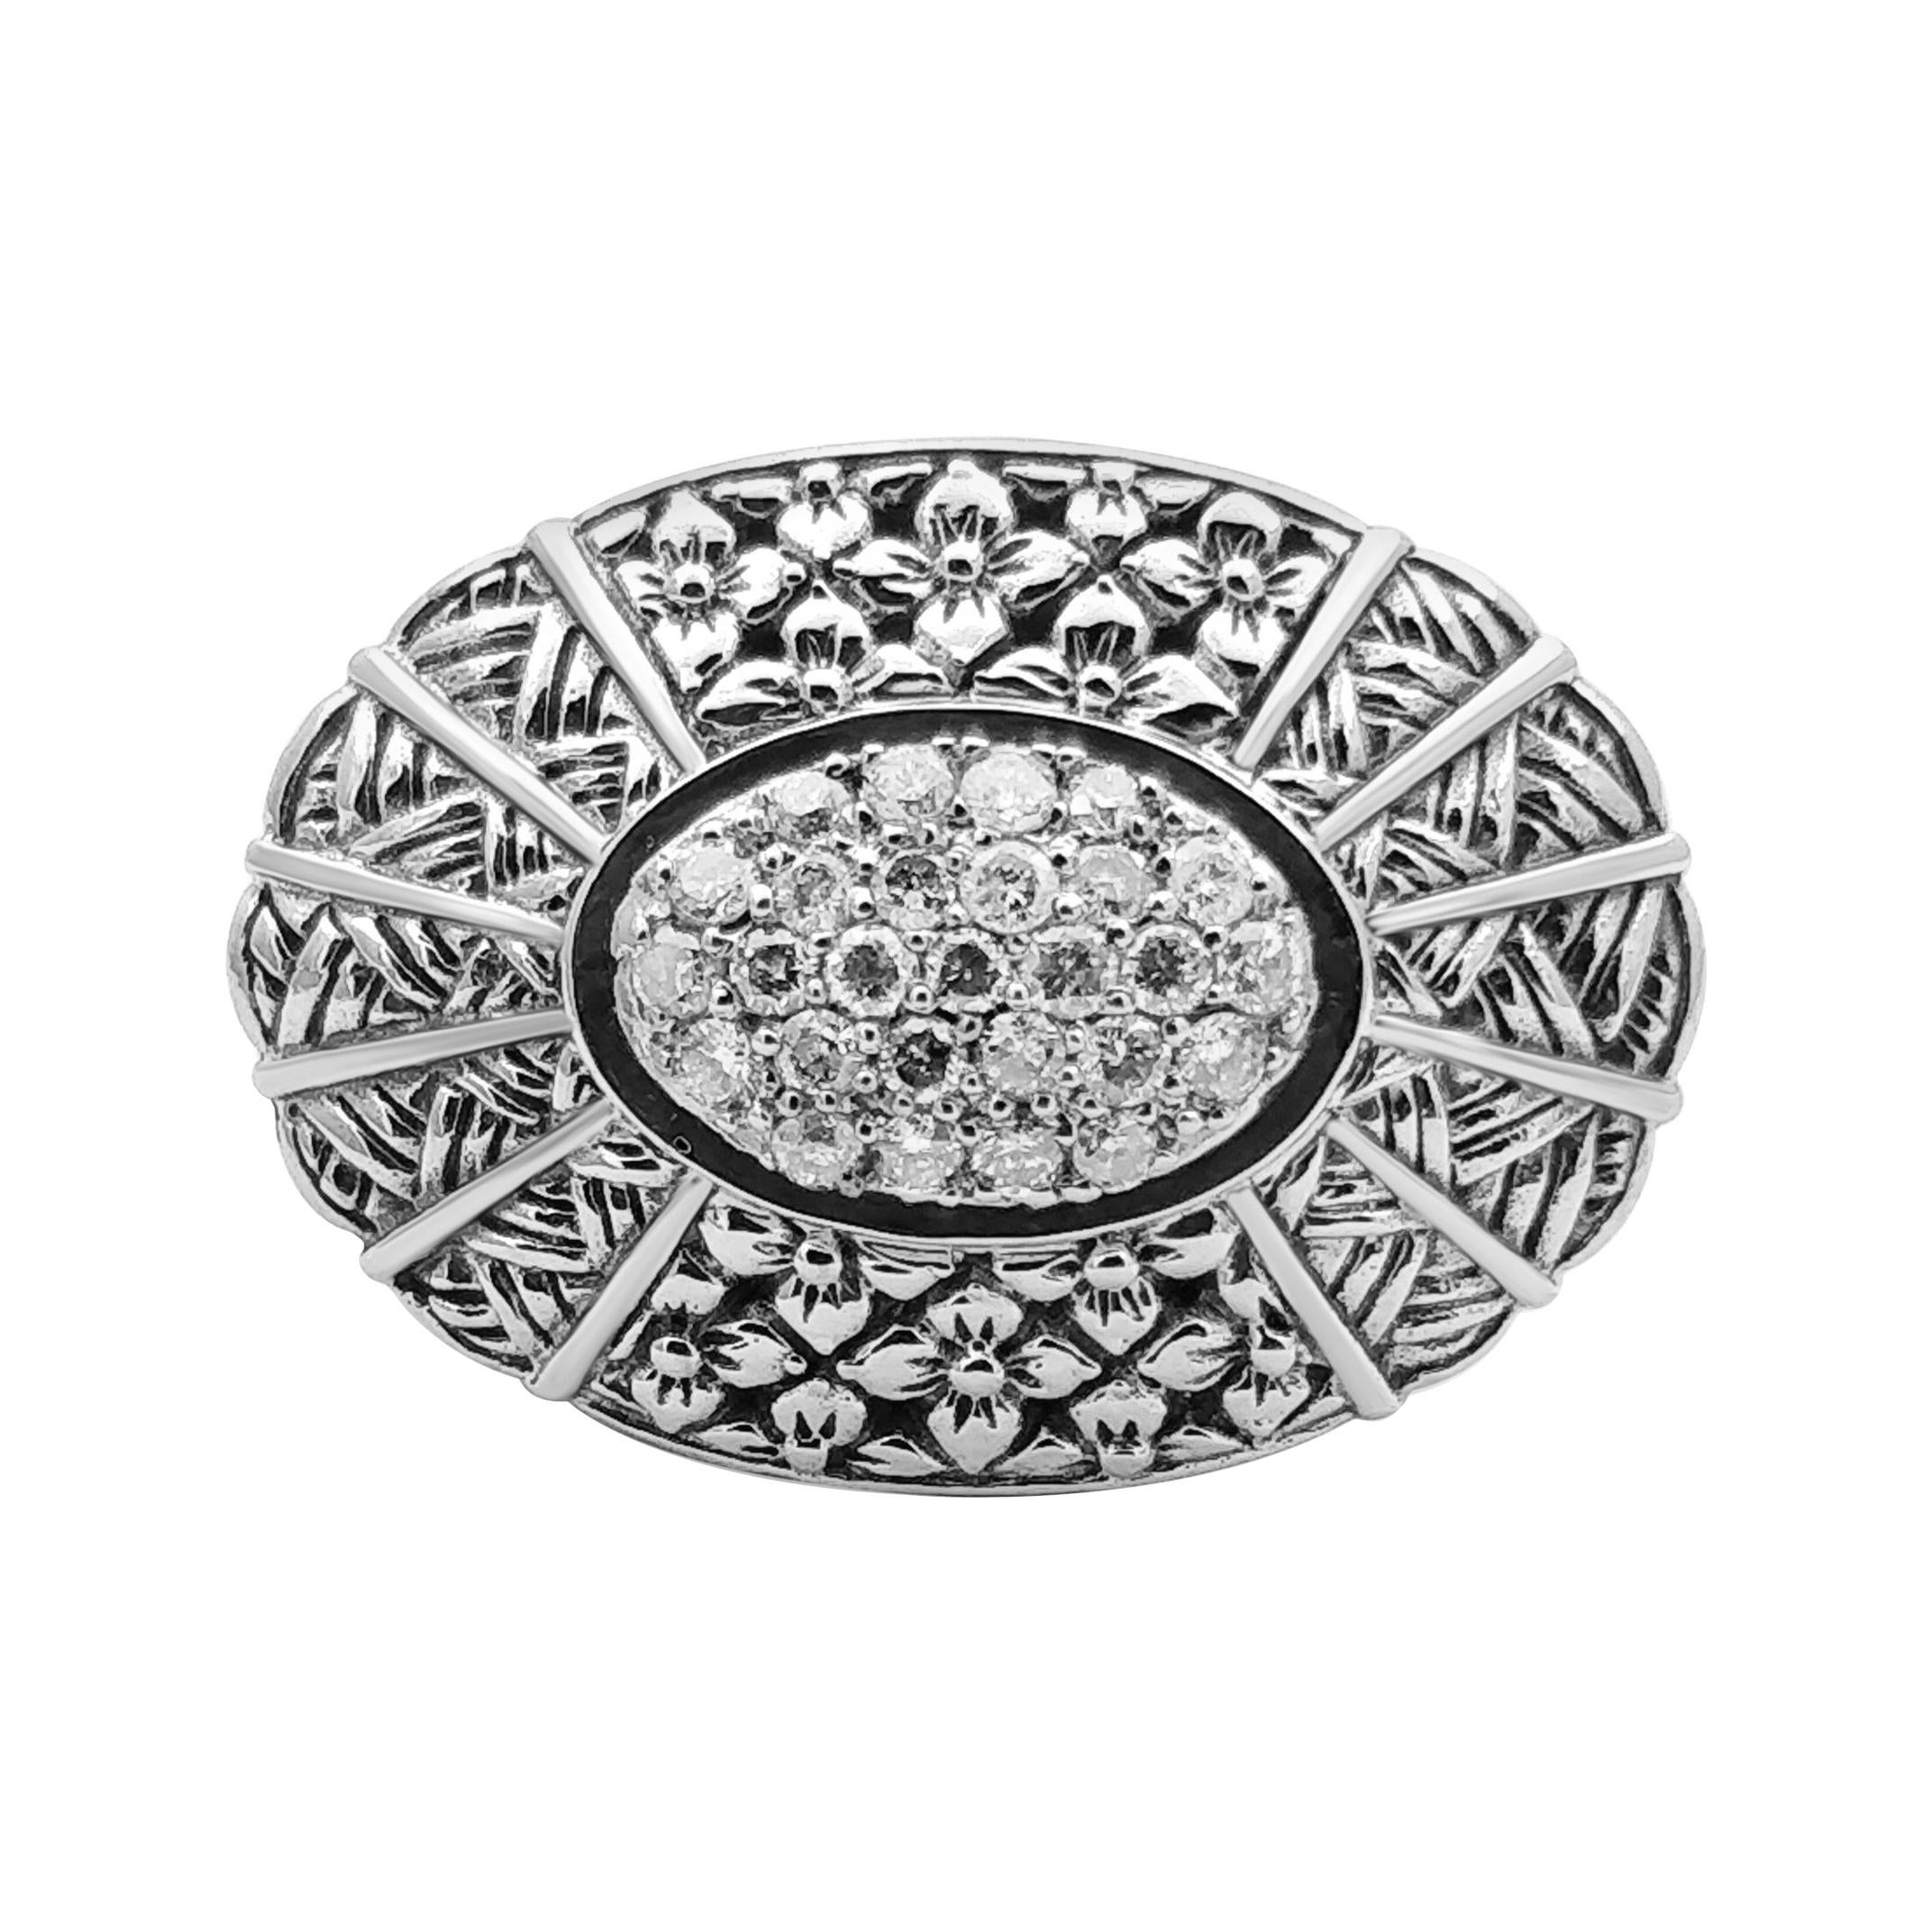 Kyoto White Diamond & Engraved Sterling Silver Ring 